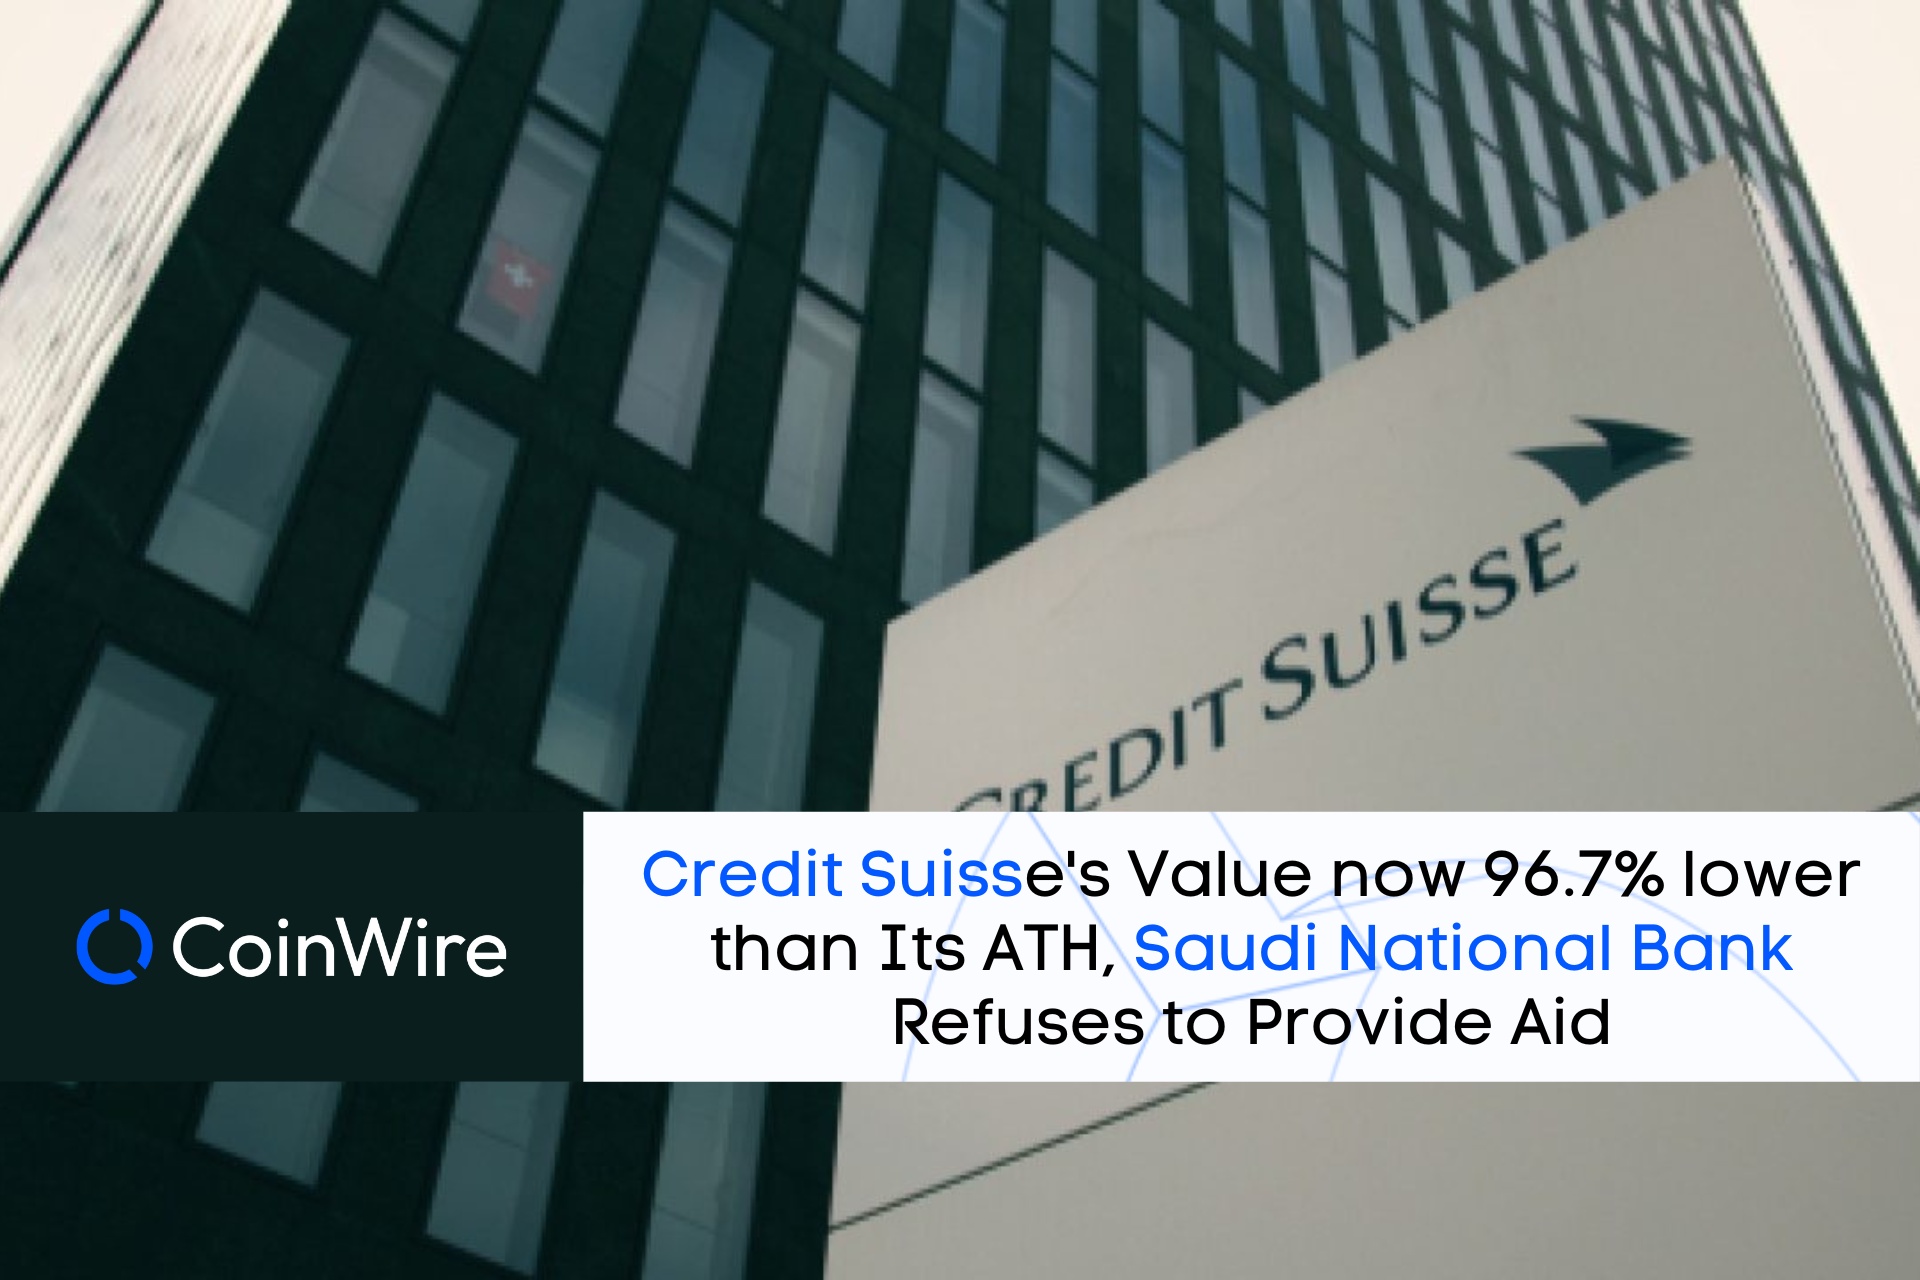 Credit Suisse'S Value Now 96.7% Lower Than Its Ath, Saudi National Bank Refuses To Provide Aid